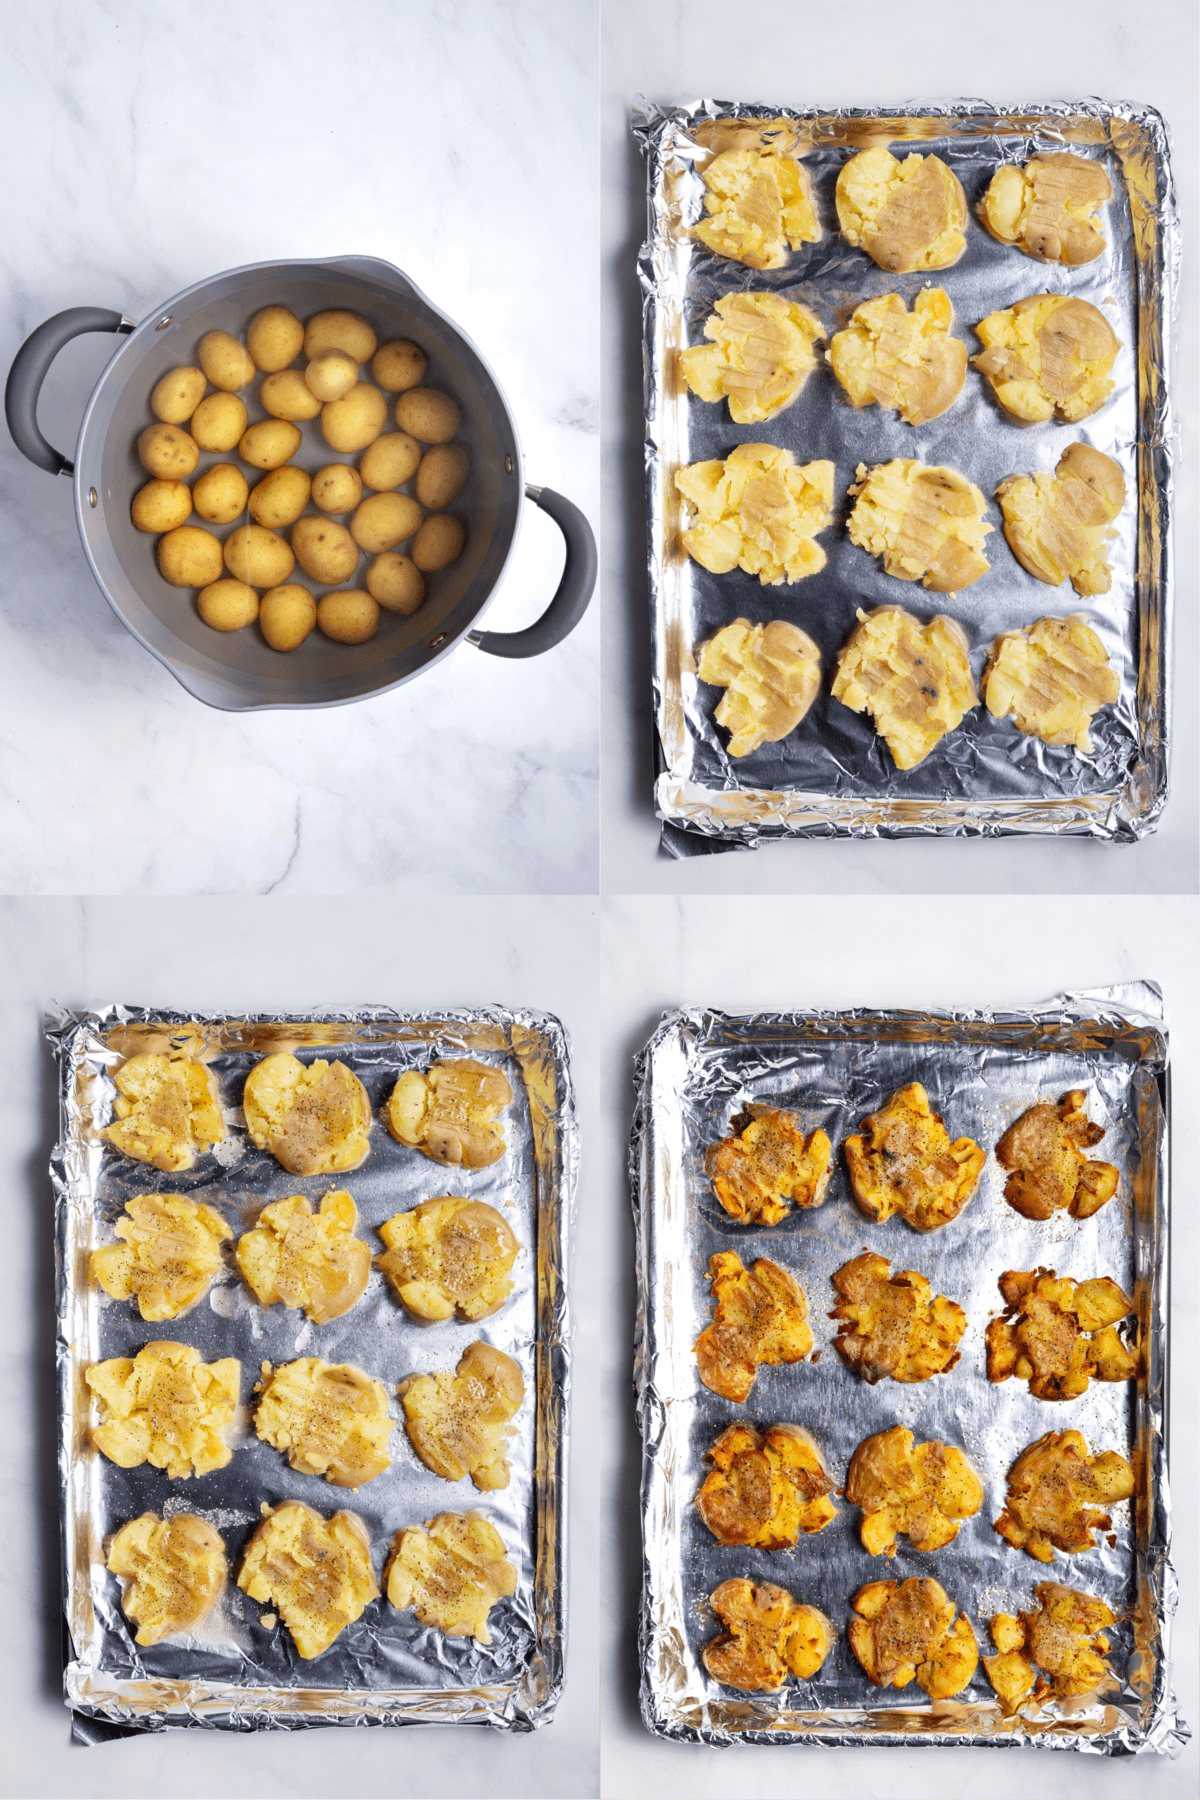 Smashed potatoes are shown on a foil-lined baking sheet with a pot of potatoes next to it.